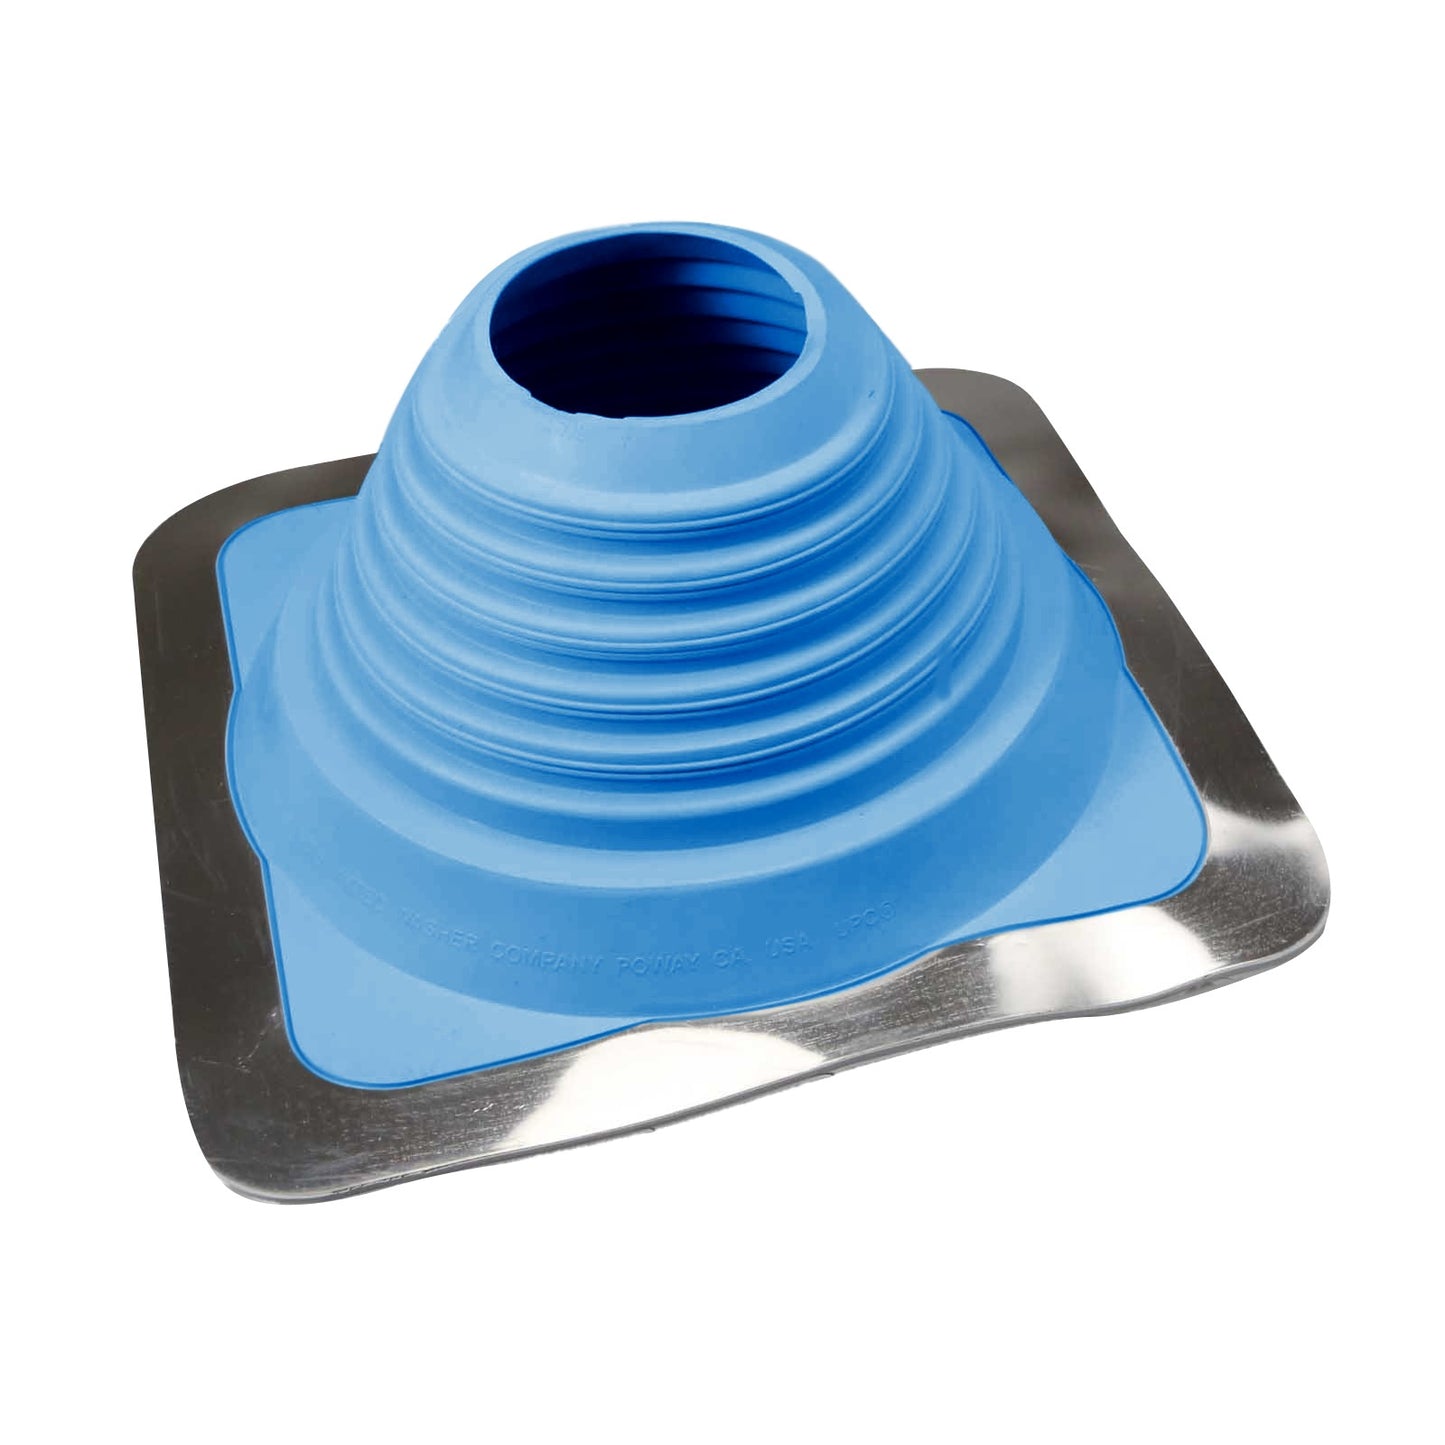 #5 Roofjack Square EPDM Pipe Flashing Boot Light Blue